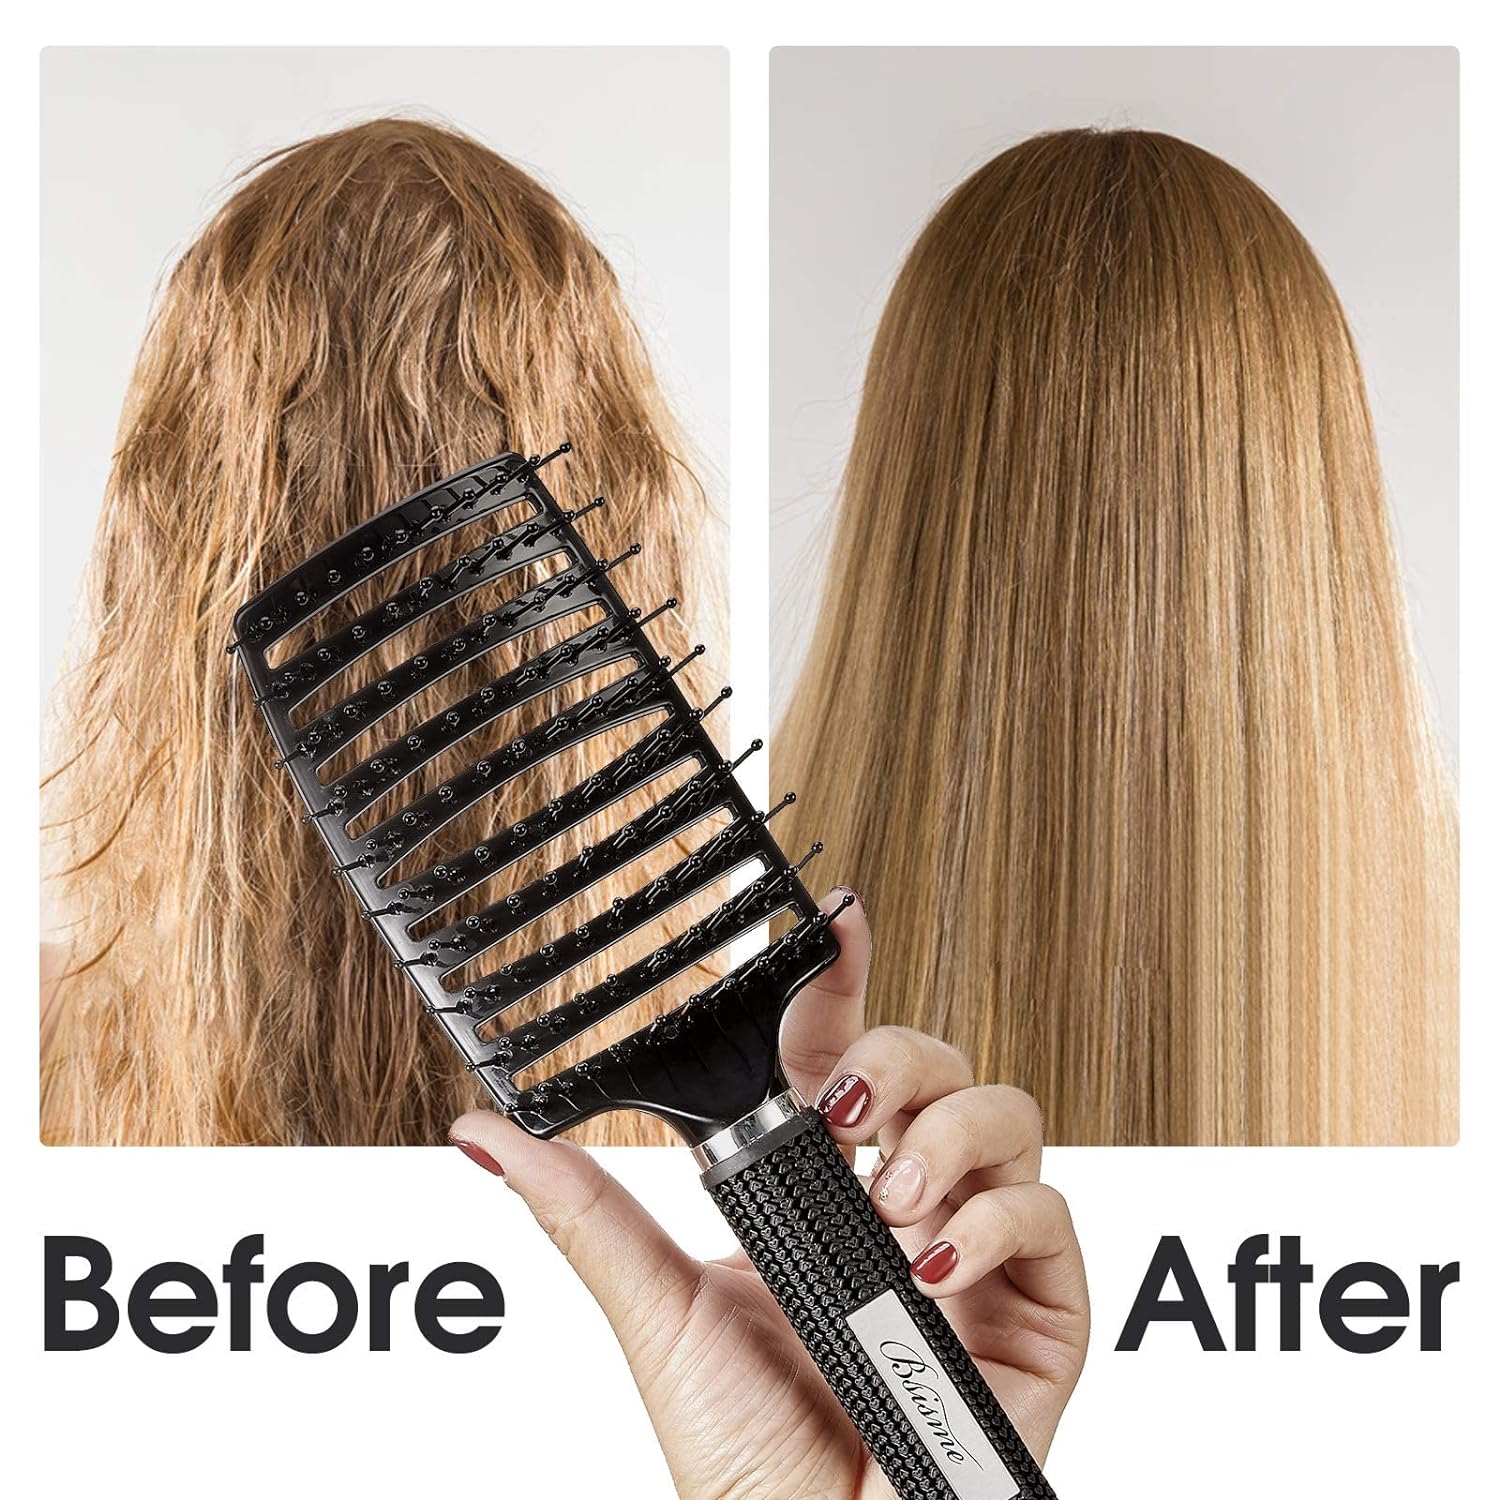 Professional curved vented hairbrush designed for less hair shedding, suitable for both men and women. This paddle brush is perfect for detangling wet or dry curly, thick, and straight hair.